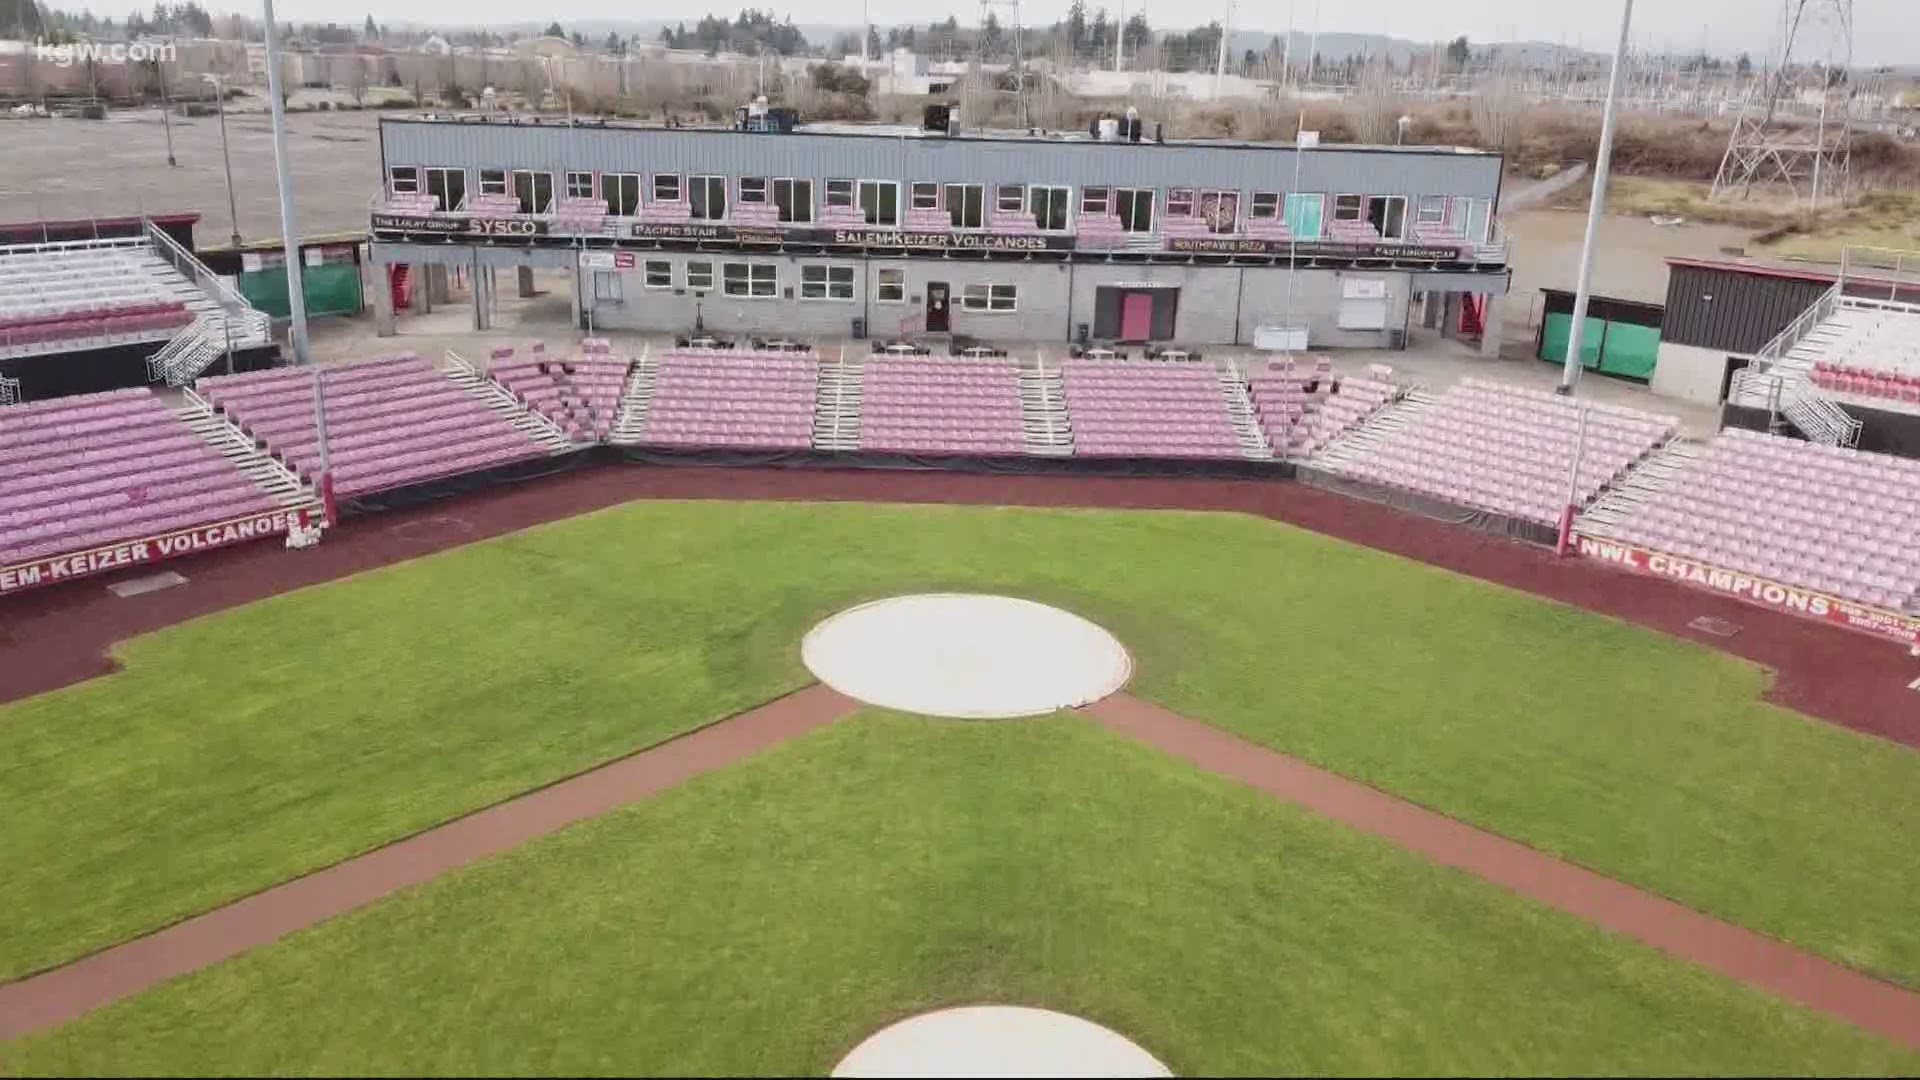 Florida Minor League Baseball Team Is Listing Their ENTIRE Stadium On  AirBnB For $5,000 A Night